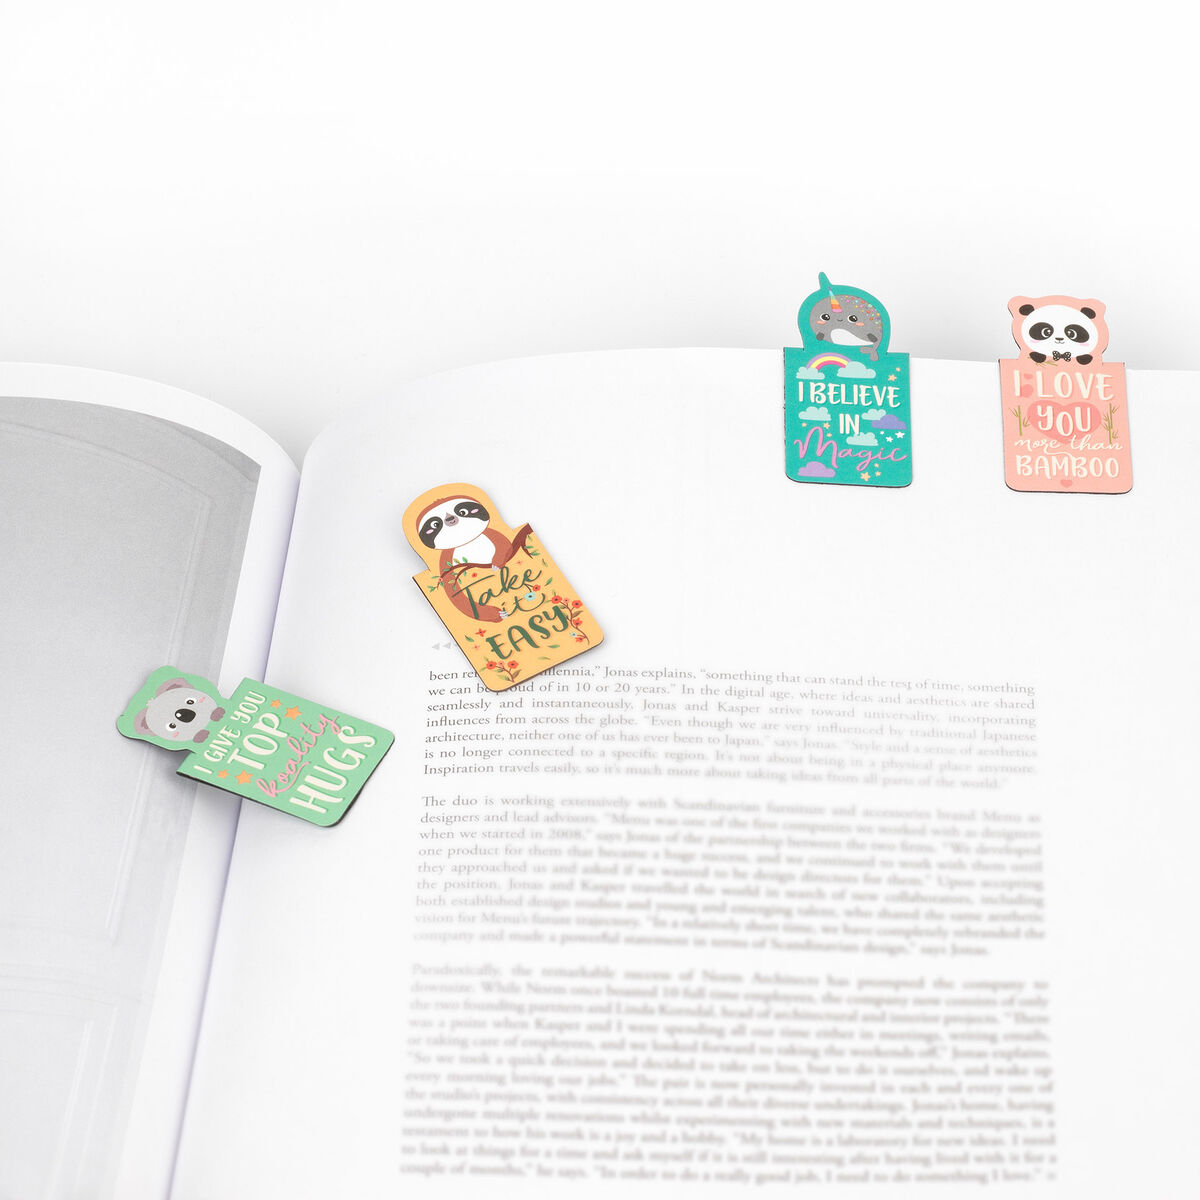 Never Stop Reading - Magnetic Bookmarks, , zoo